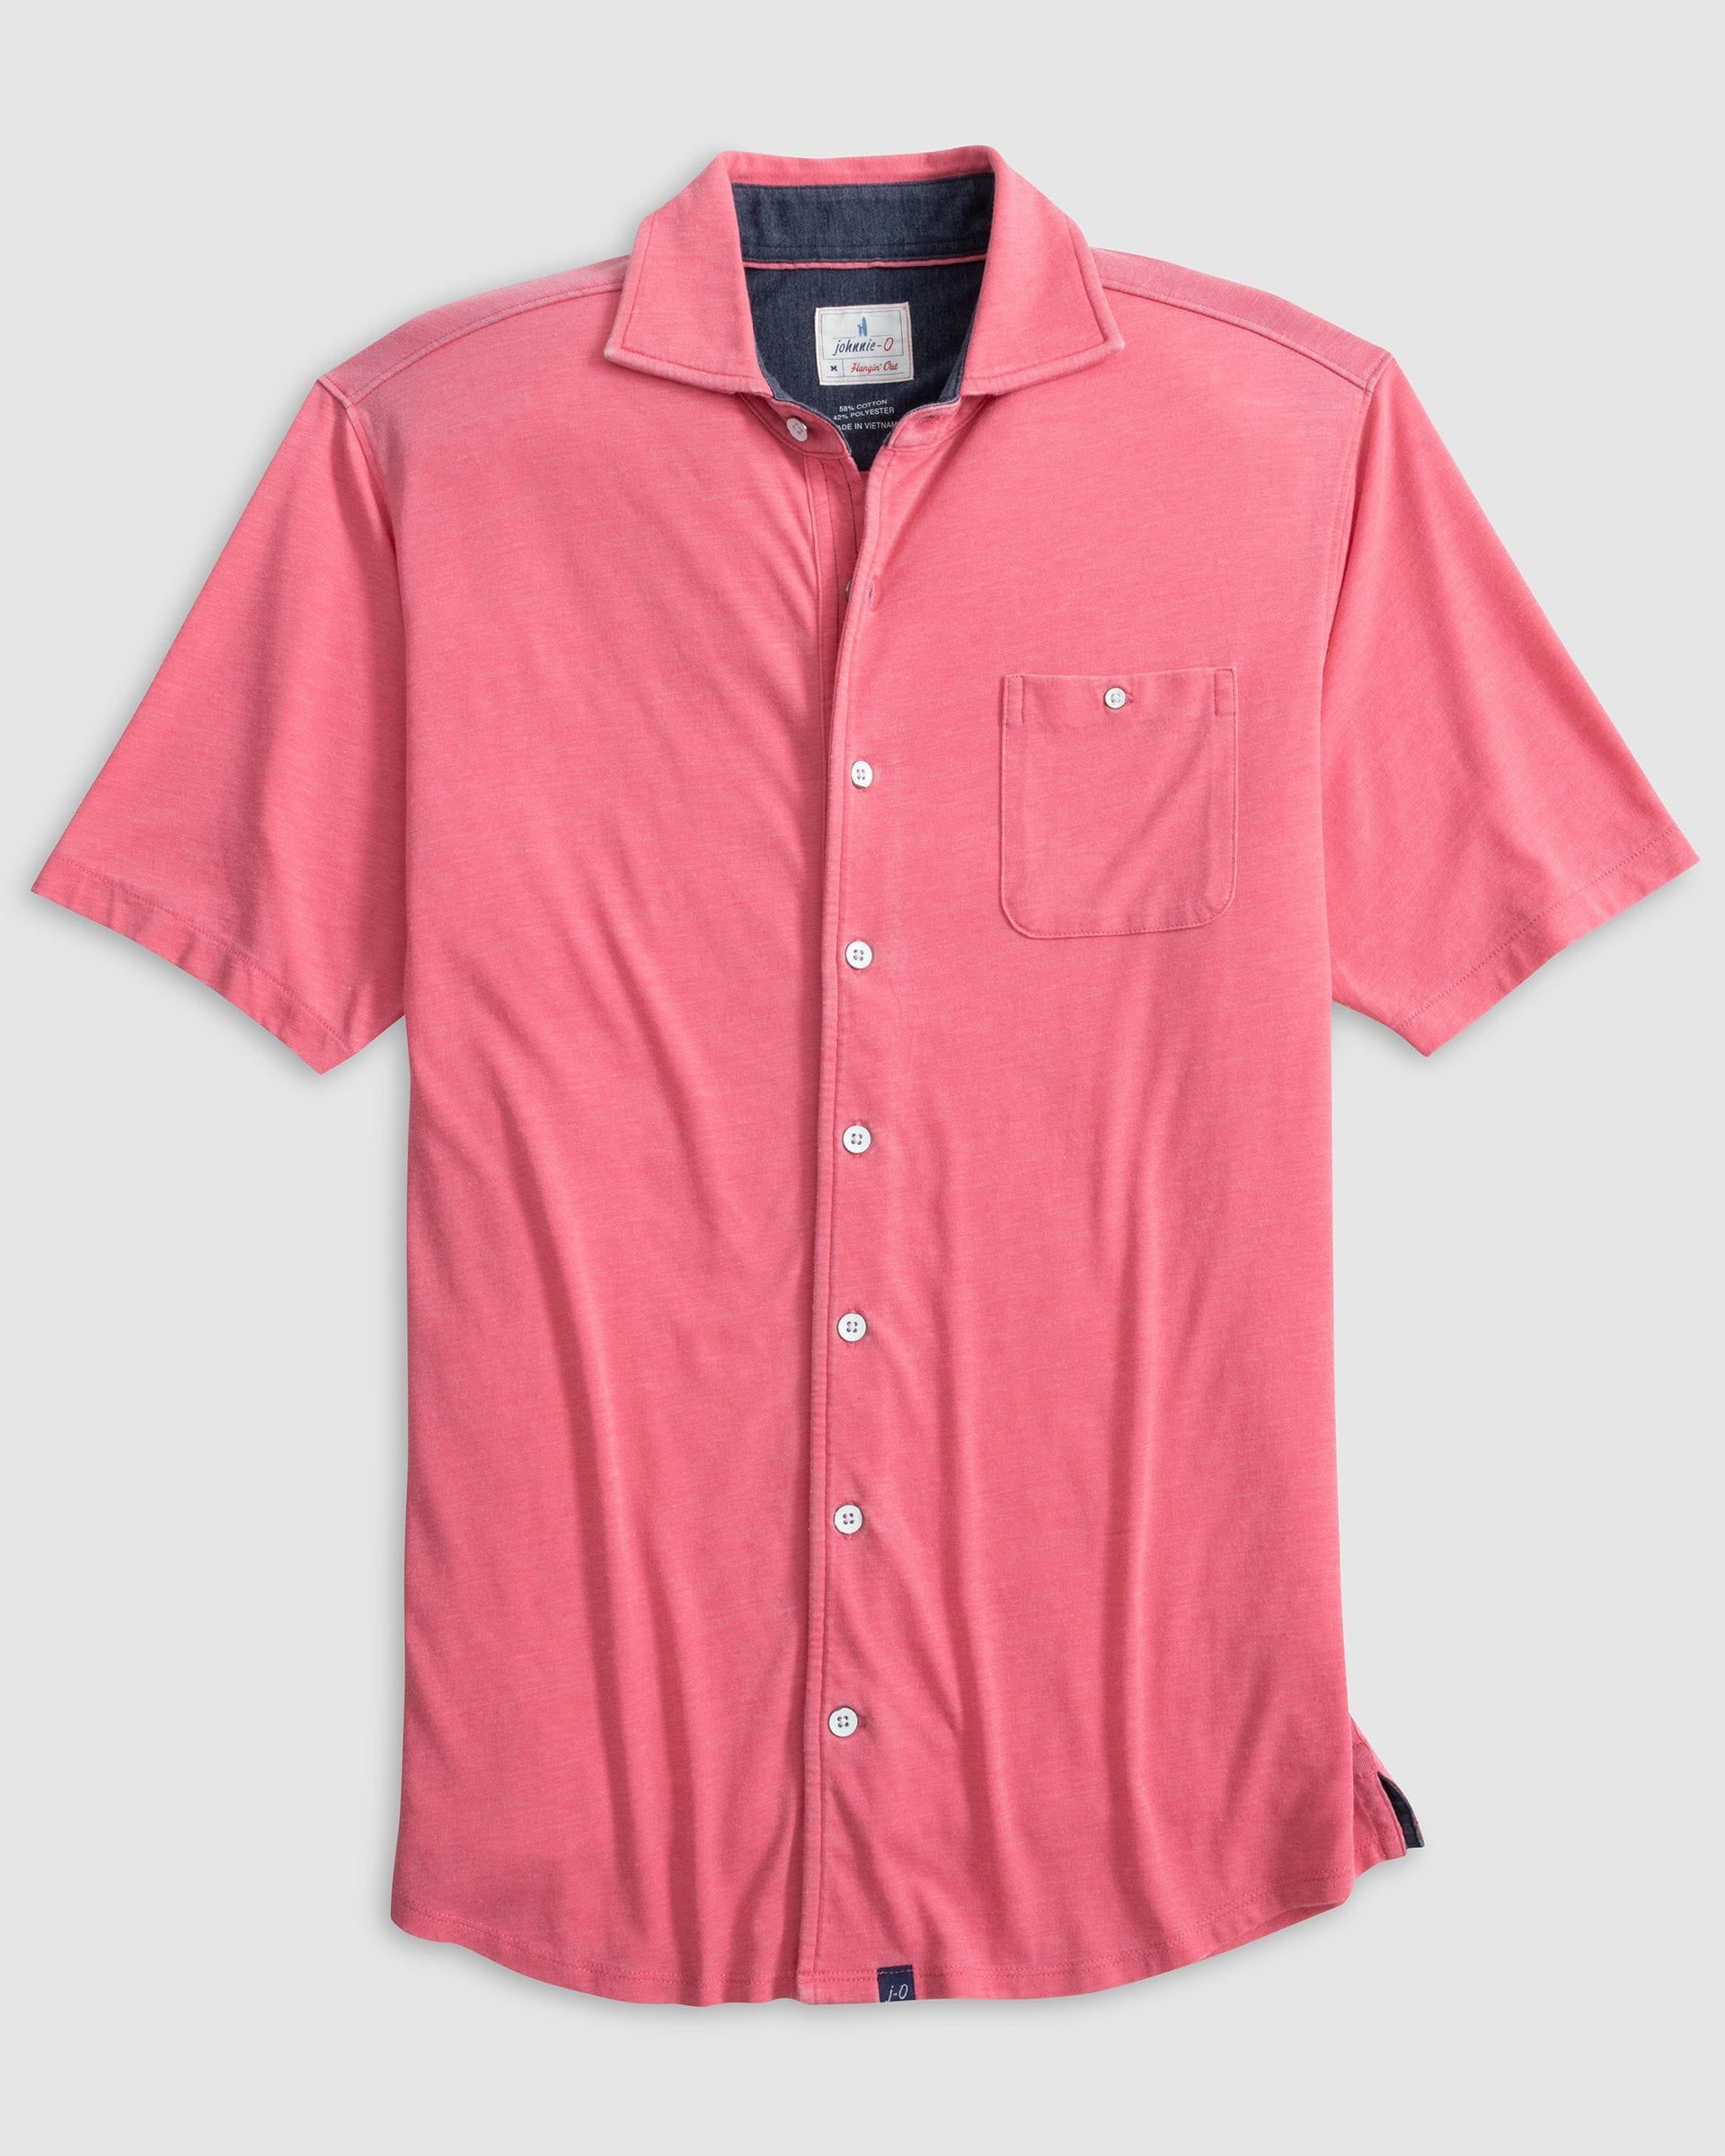 Crouch Hangin' Out Button Up Shirt